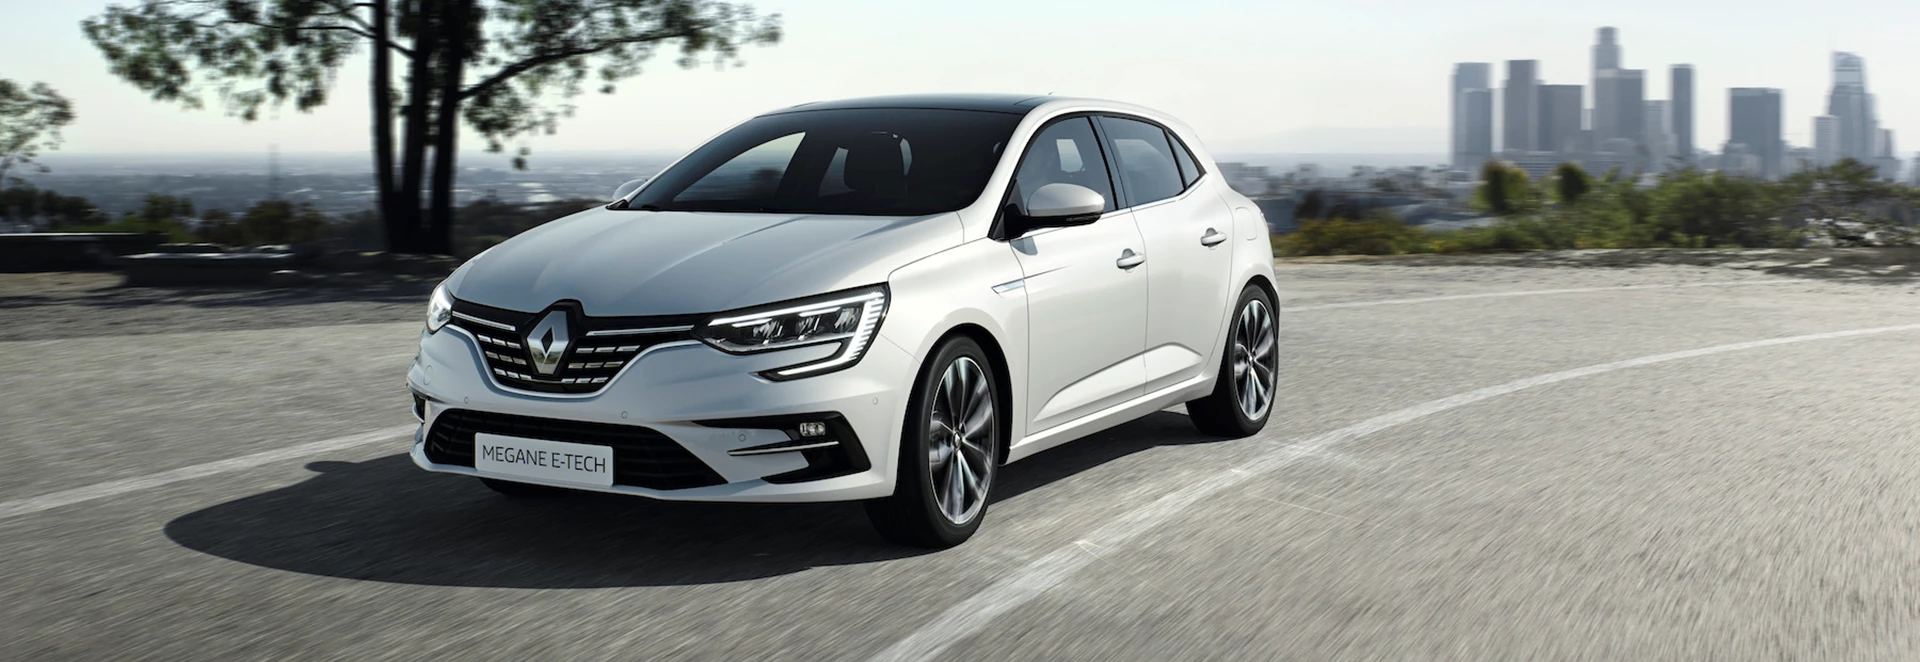 Renault announces prices of new Megane Hatch E-Tech plug-in hybrid 